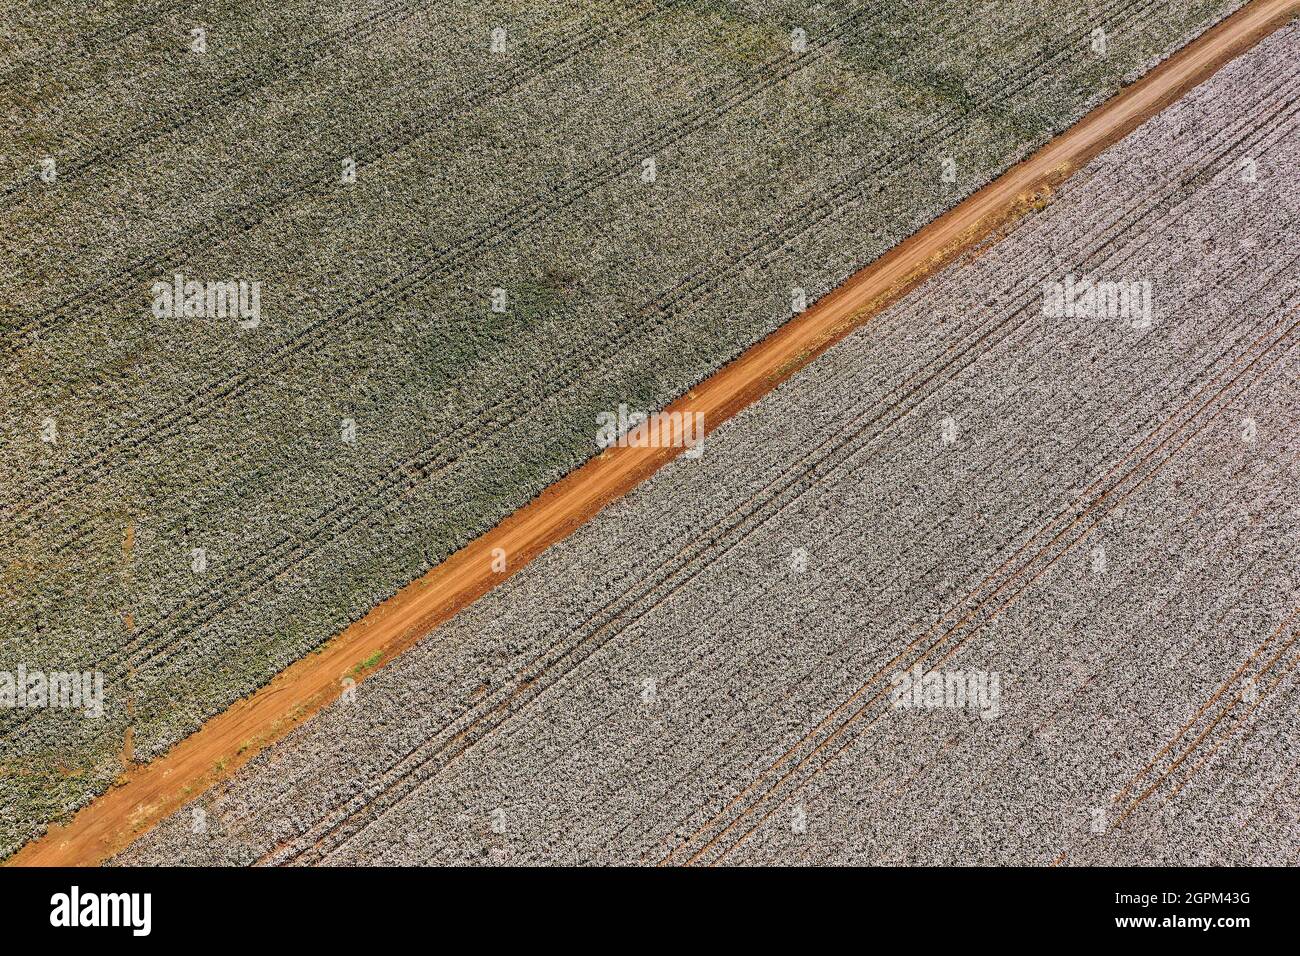 Mature Cotton field ready for picking, Aerial view. Stock Photo